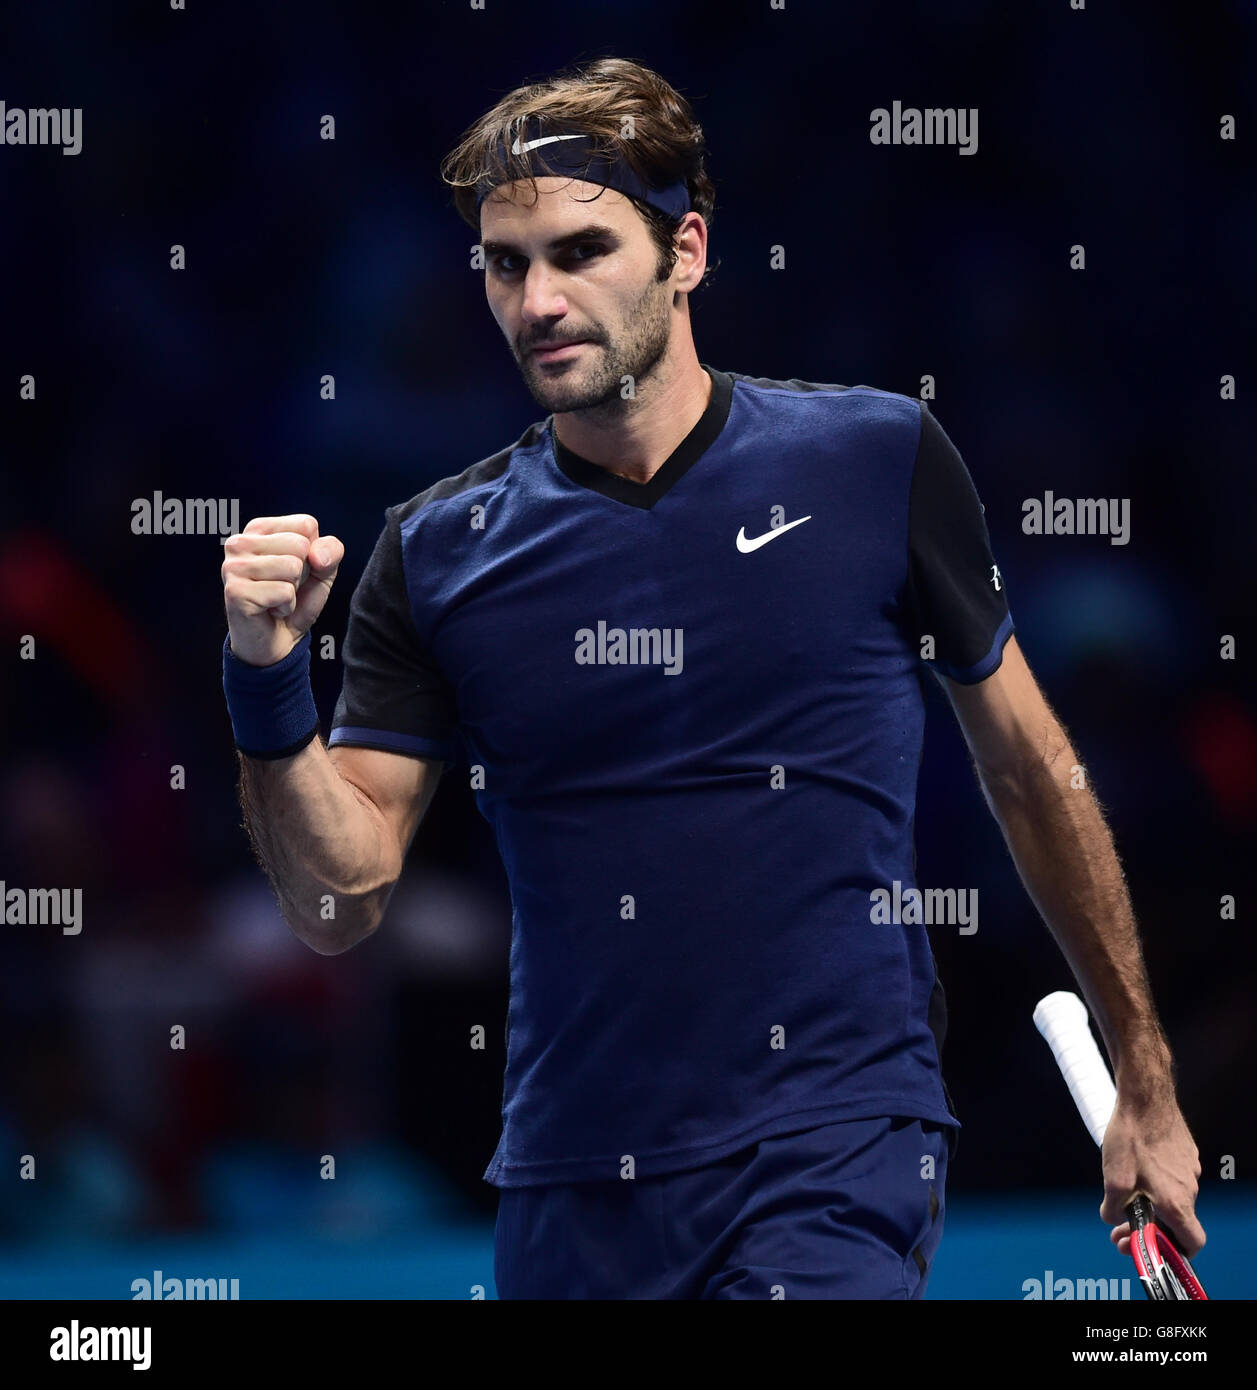 Switzerland's Roger Federer celebrates his win over Japan's Kei Nishikori during day five of the ATP World Tour Finals at the O2 Arena, London. PRESS ASSSOCIATION Photo. Picture date: Thursday November 19, 2015. See PA story TENNIS London. Photo credit should read: Adam Davy/PA Wire. Stock Photo